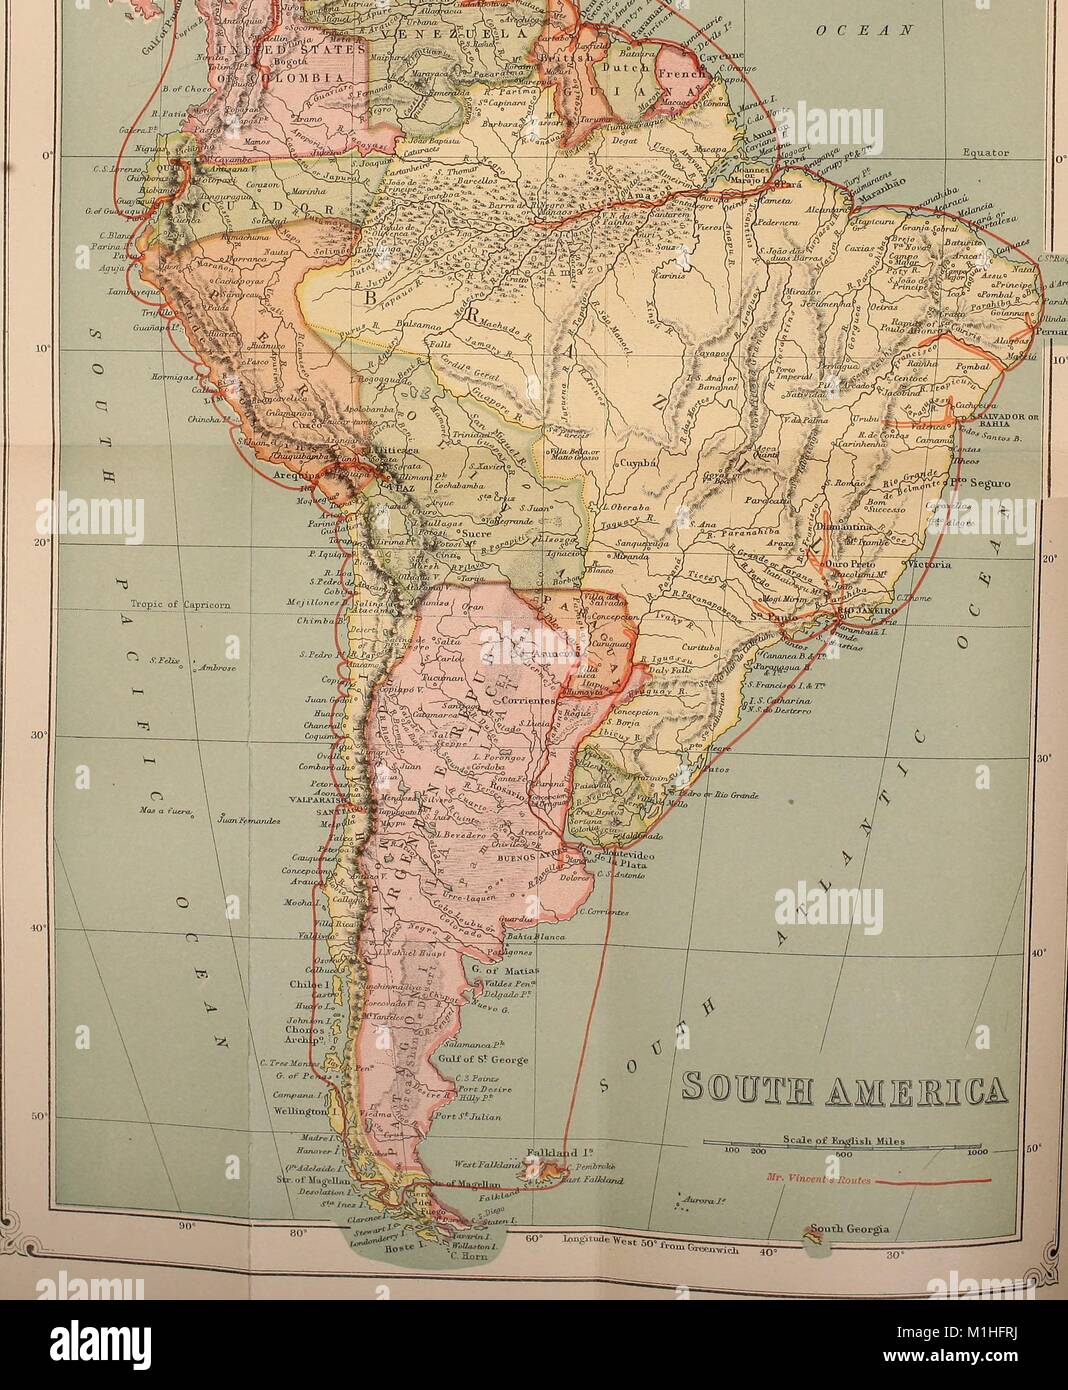 Physical and political map of South America, with a scale, lines of latitude and longitude, shaded relief to denote physical features, color-coded political regions, and red lines indicating the author's travel routes, from the volume 'Around and About South America, ' authored by Frank Vincent, 1890. () Stock Photo